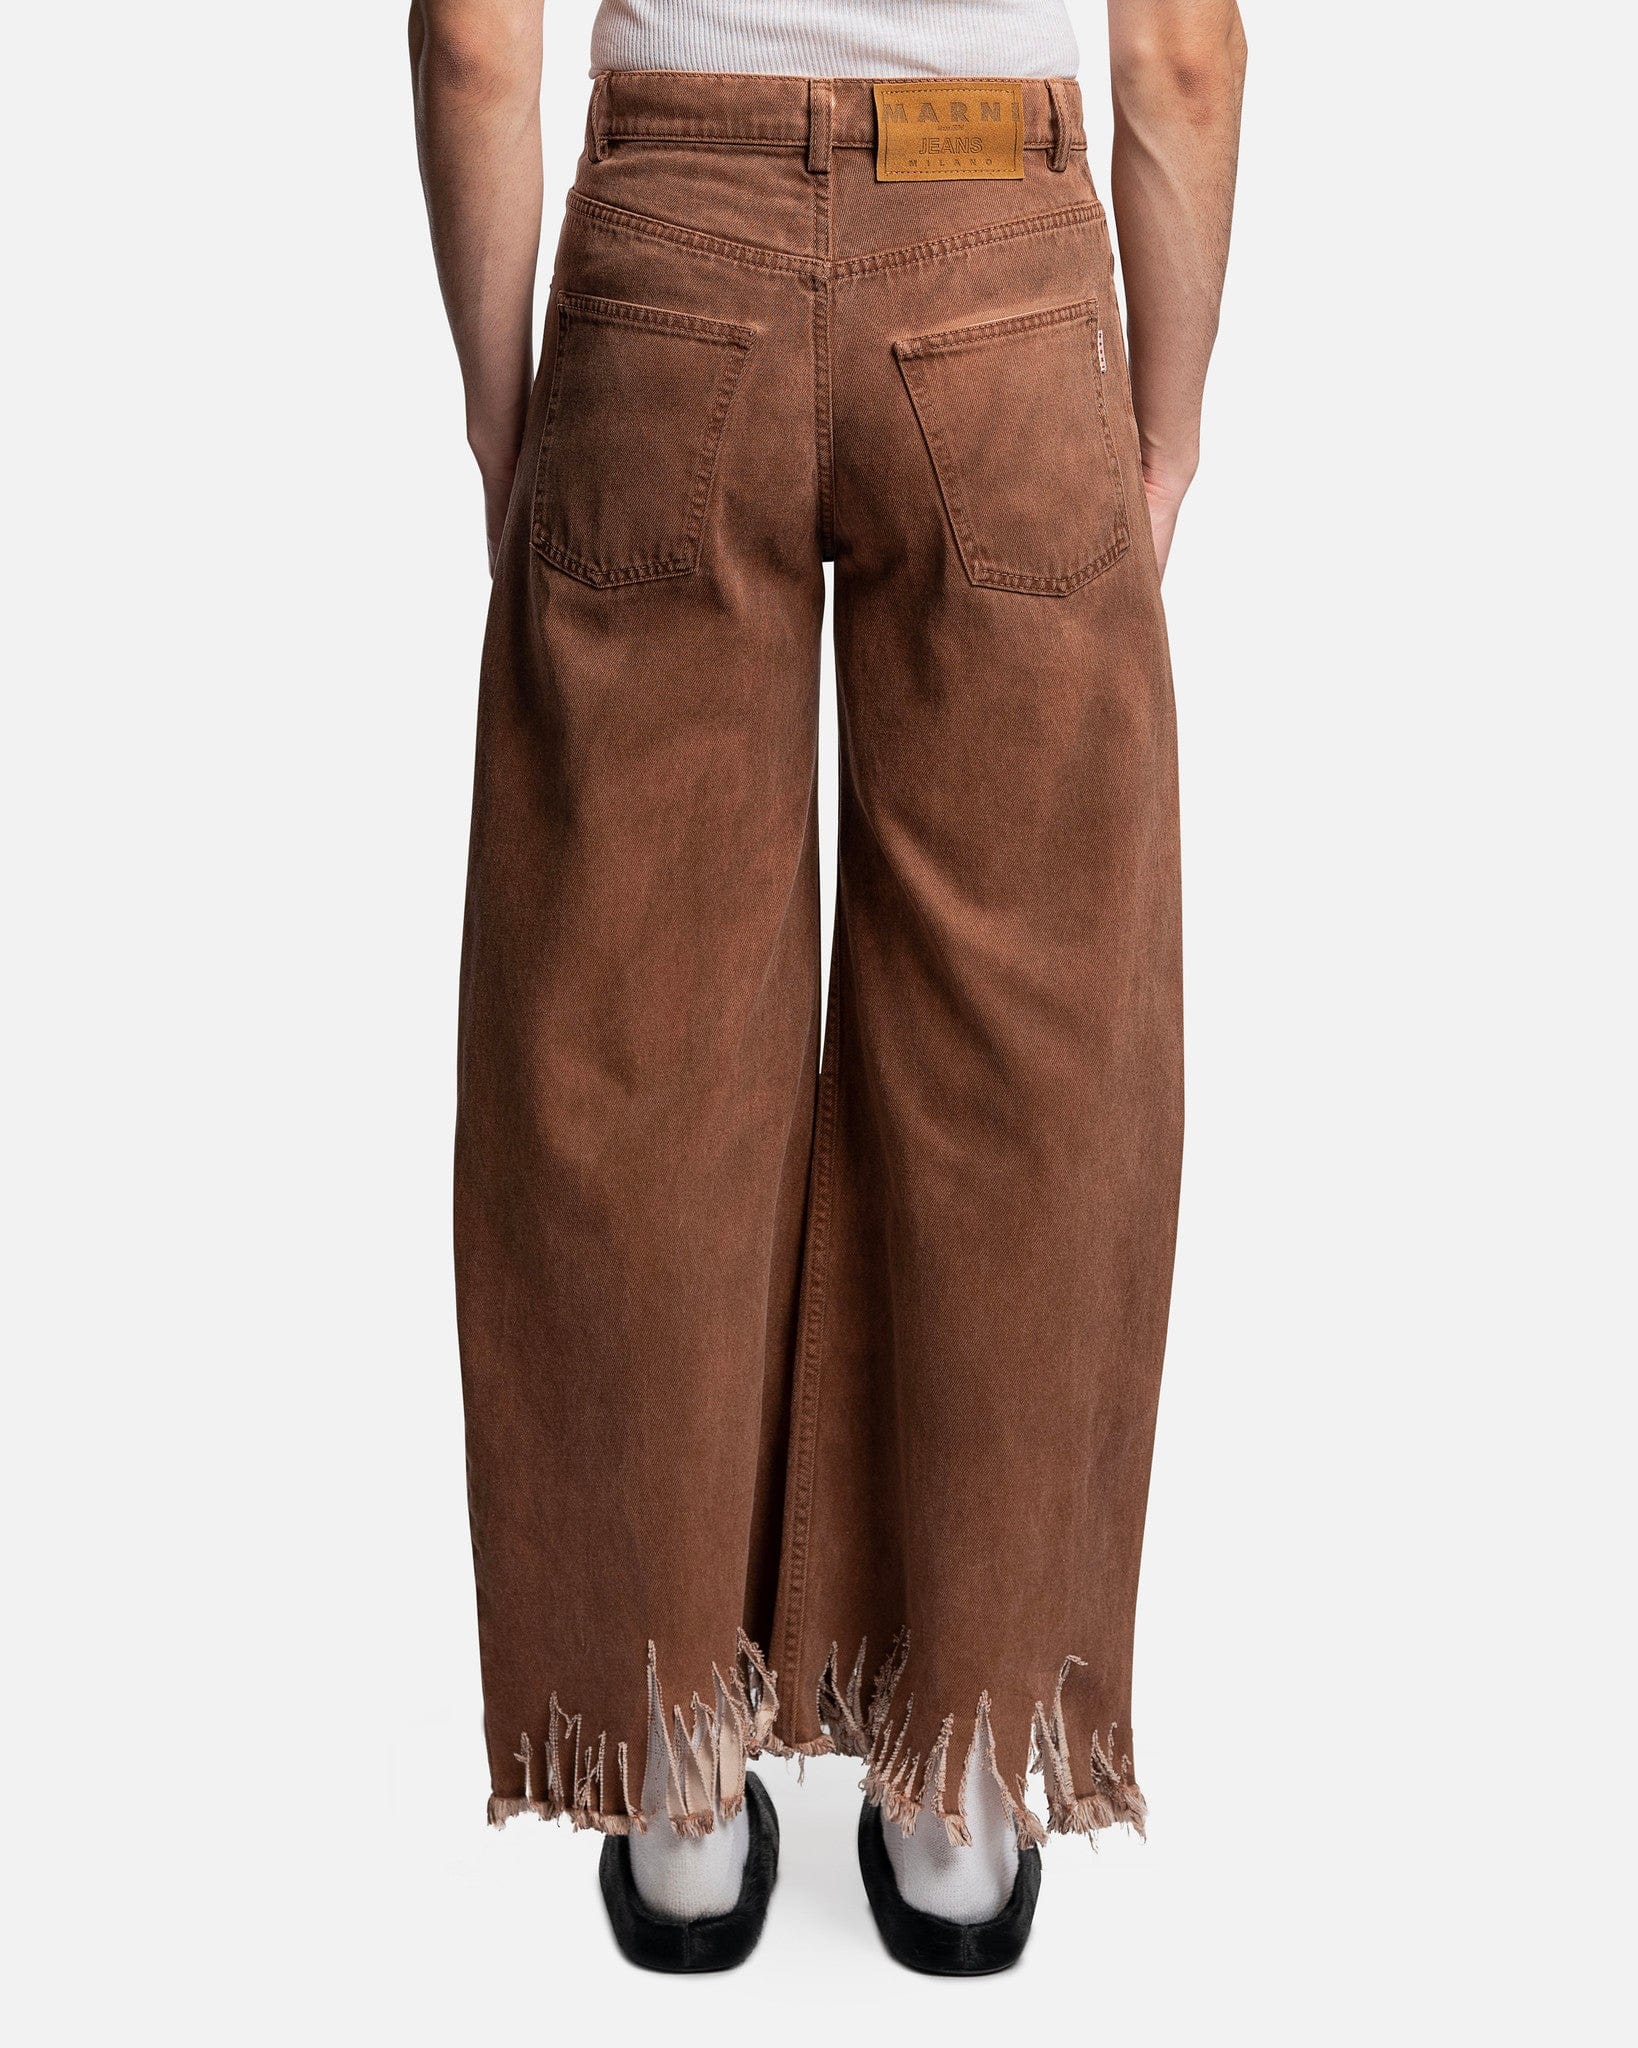 Marni Men's Pants Faded Coated Drill Denim in Earth of Siena